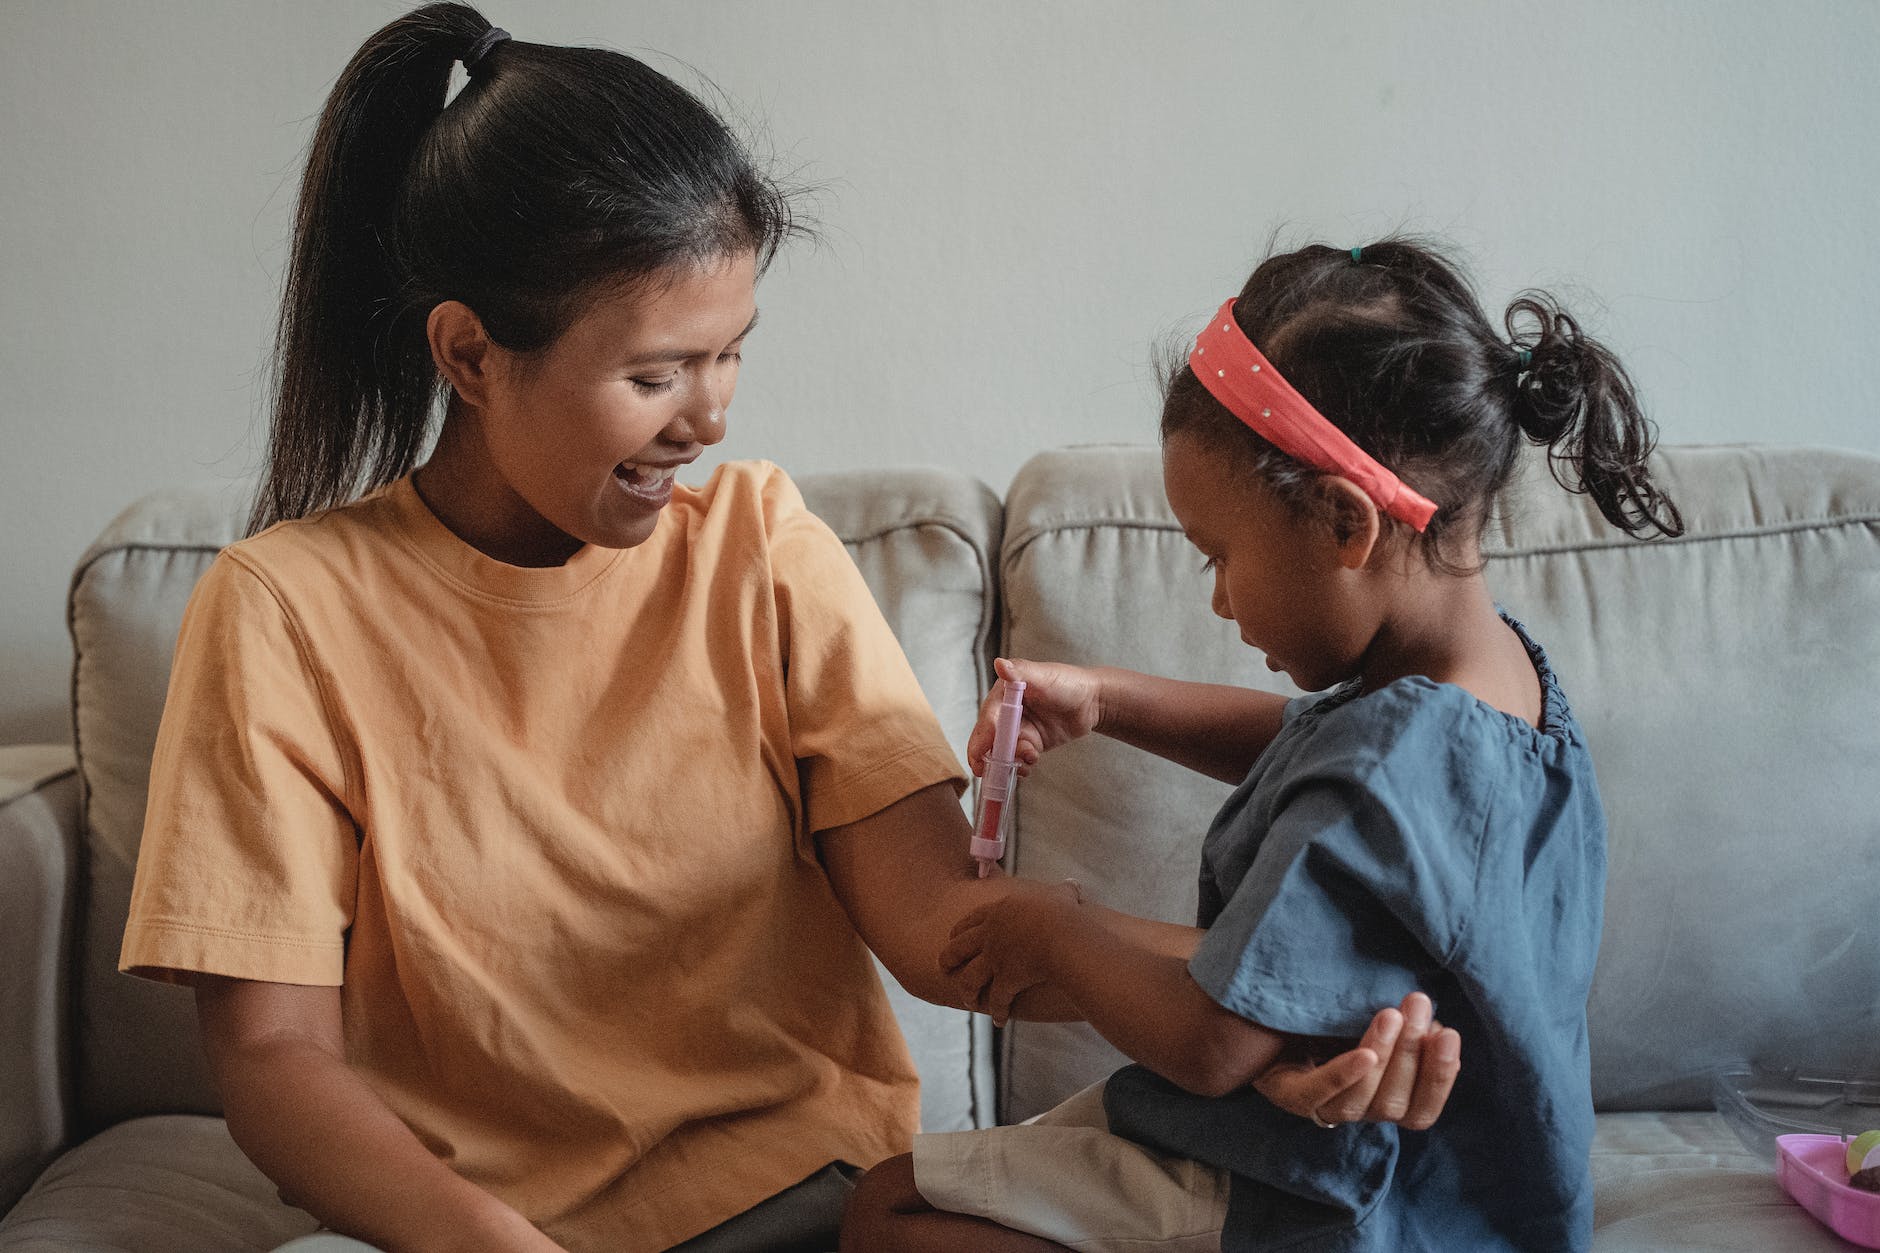 ethnic mother and daughter playing with toy syringe